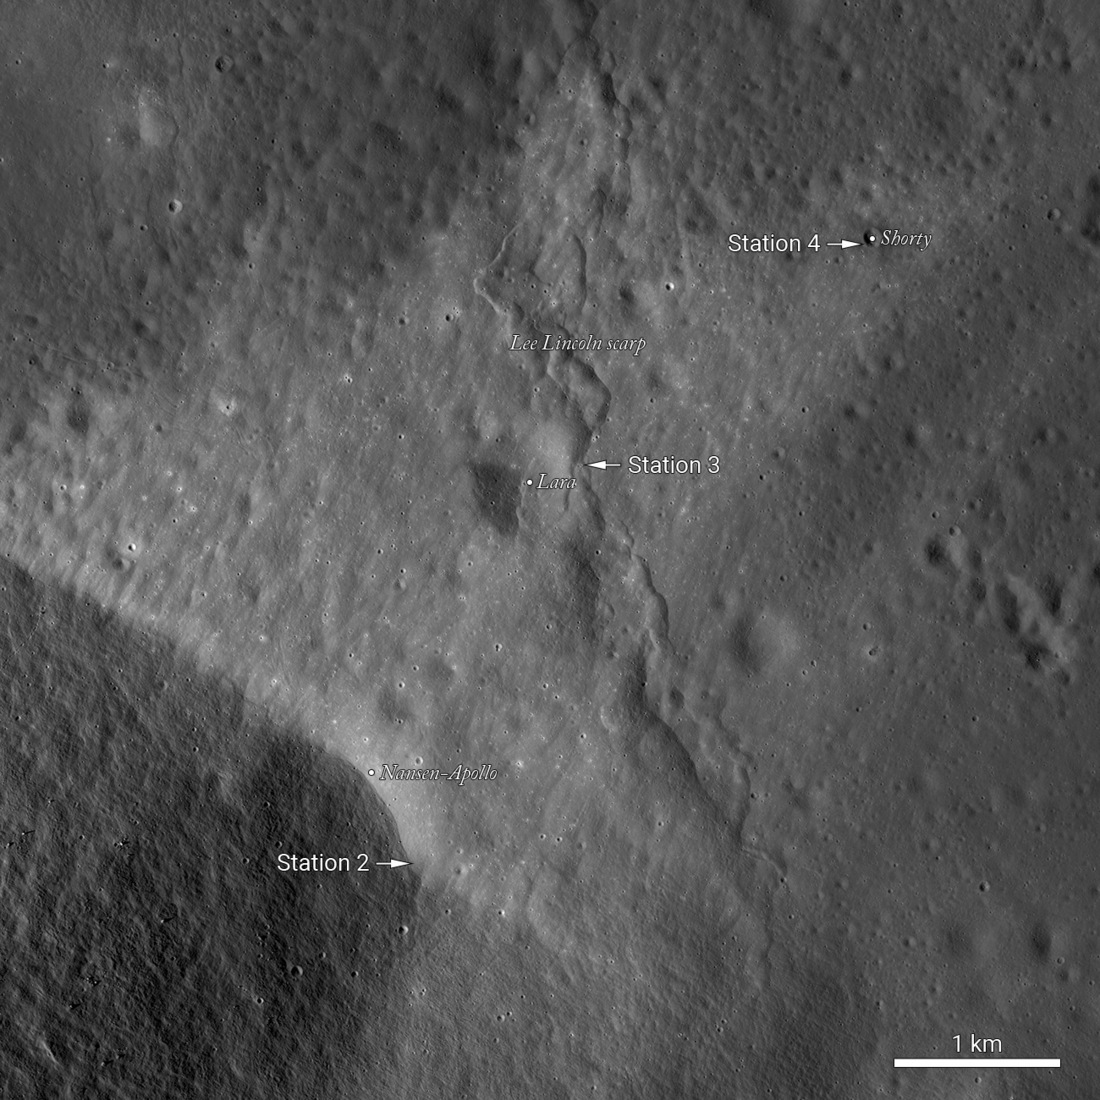 LROC NAC image of the Apollo 17 EVA 2 from the South Massif to Shorty crater with labels for Stations 2, 3, and 4 across the Lee Lincoln scarp and light mantle material.